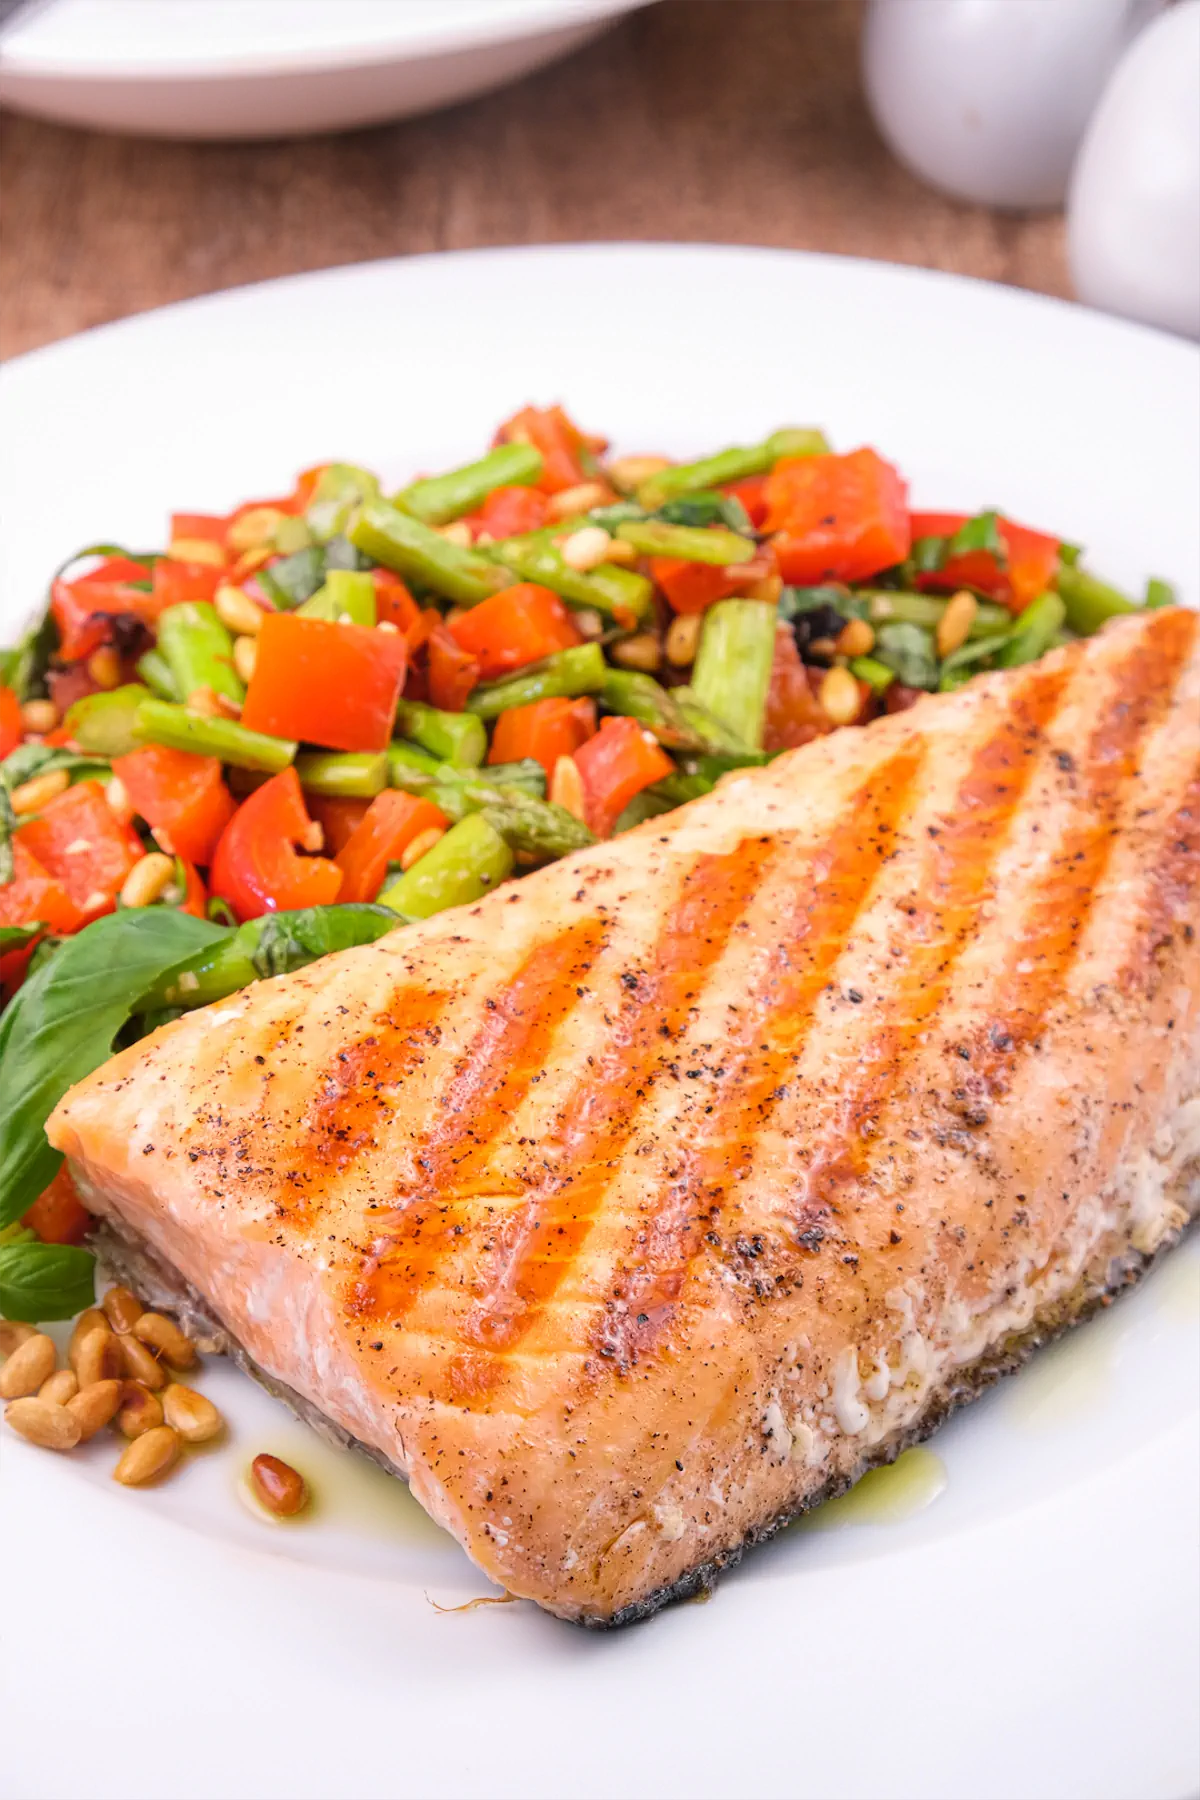 Grilled salmon with asparagus salad.